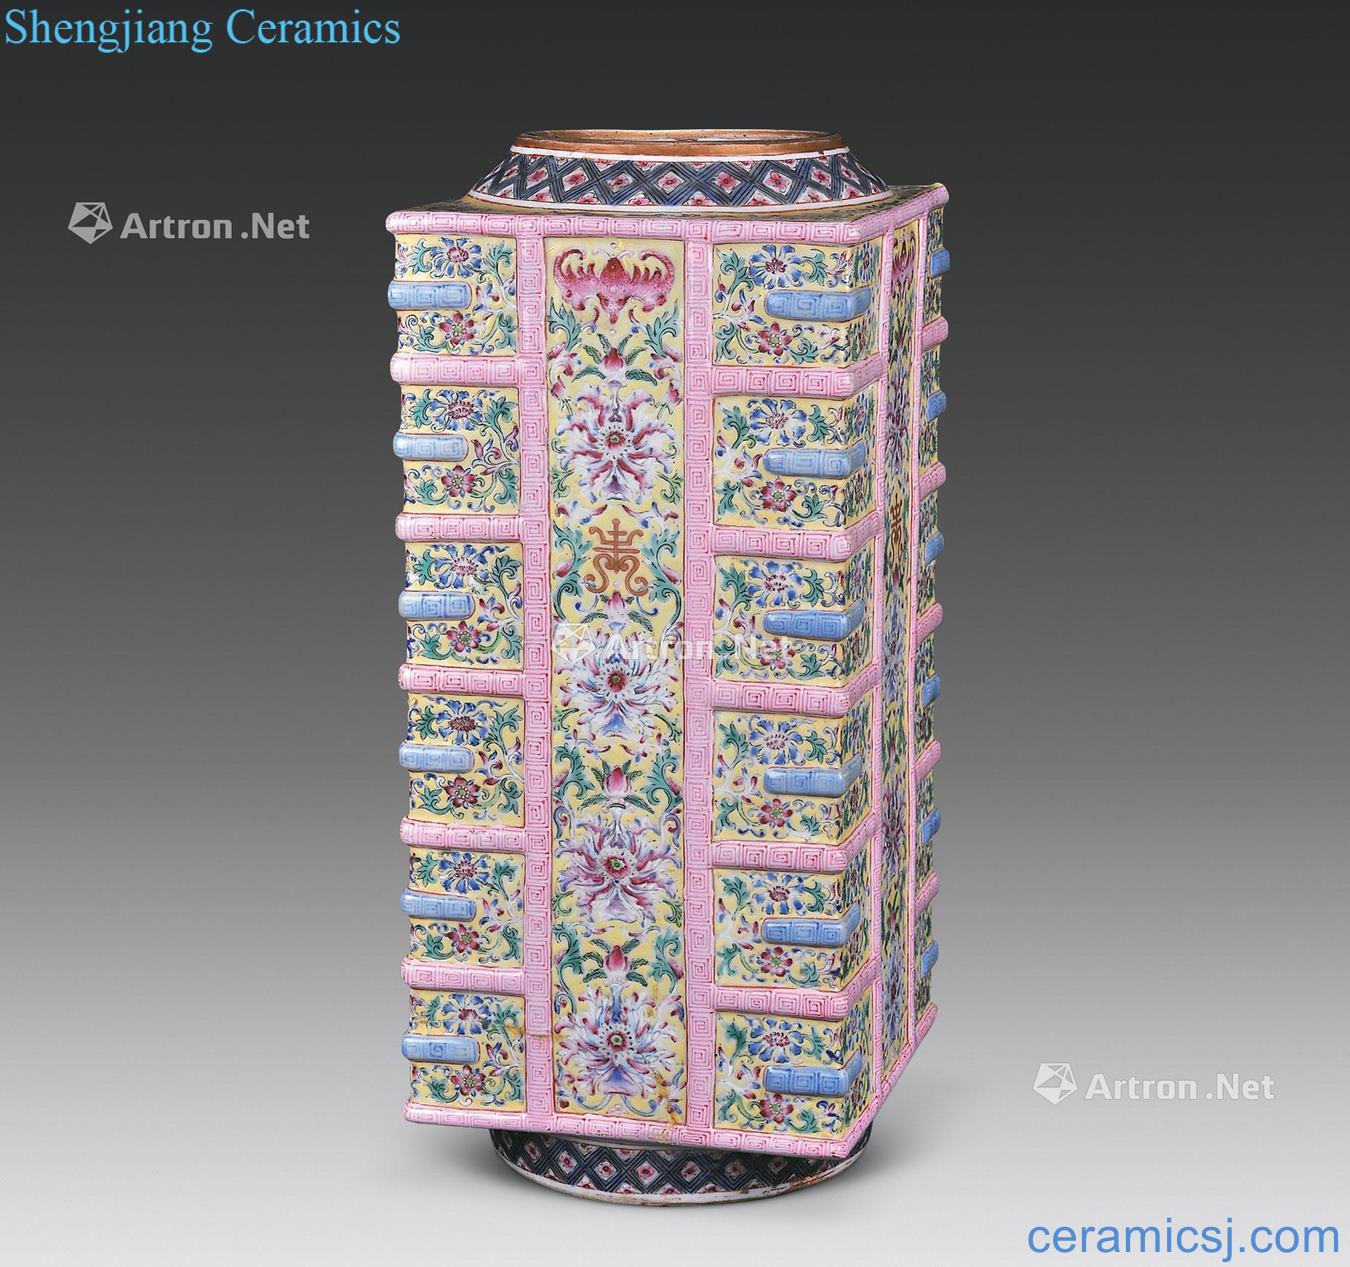 In late qing dynasty To pastel yellow lotus flower live wen cong type bottle